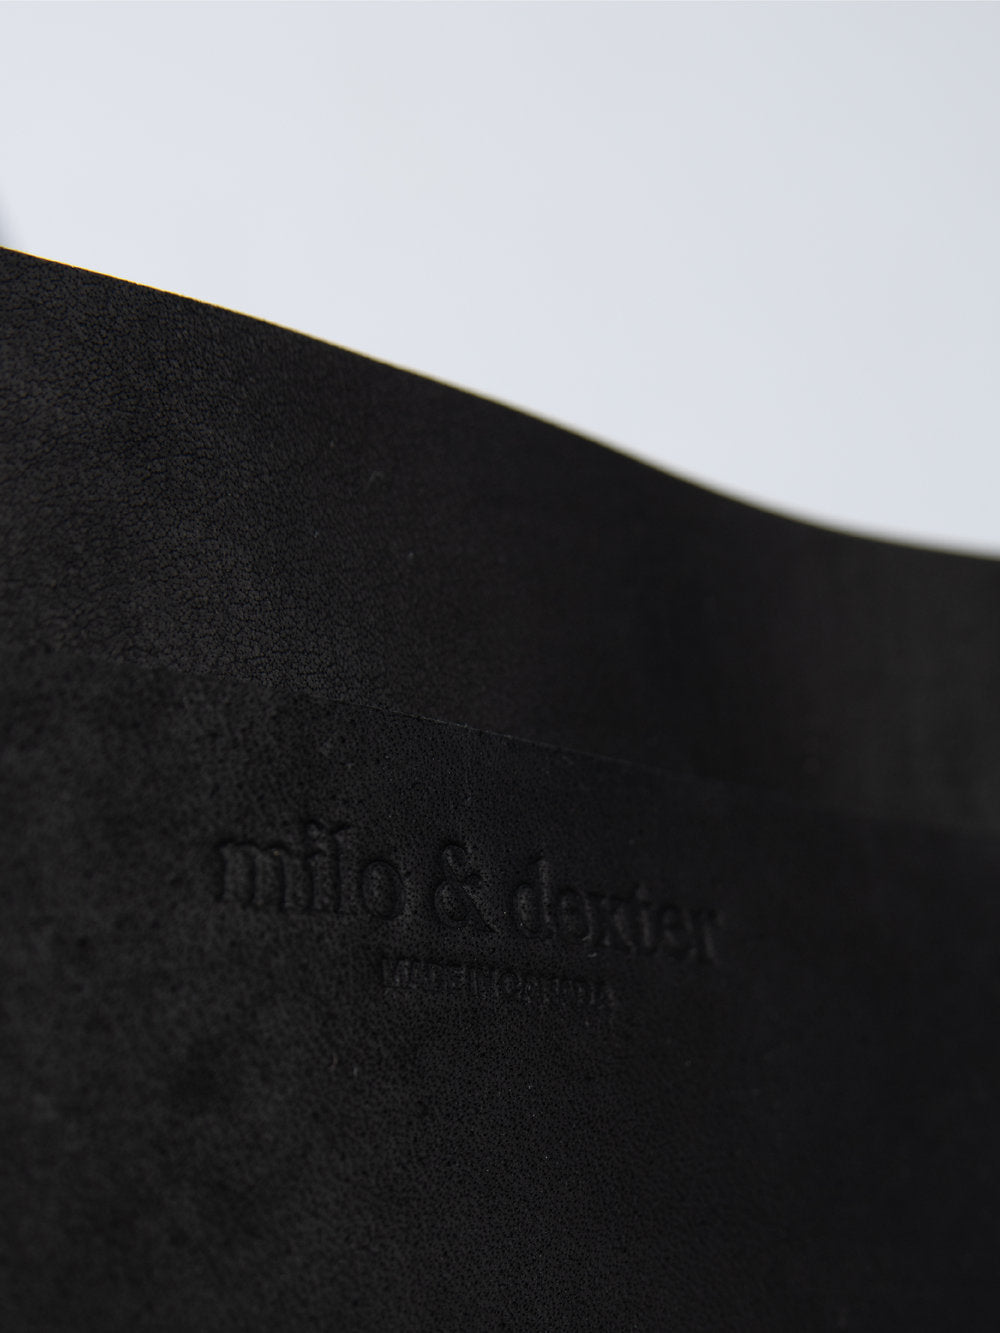 Milo & Dexter - SS24 - Classic Utility Leather Bag in Black - close -up 5